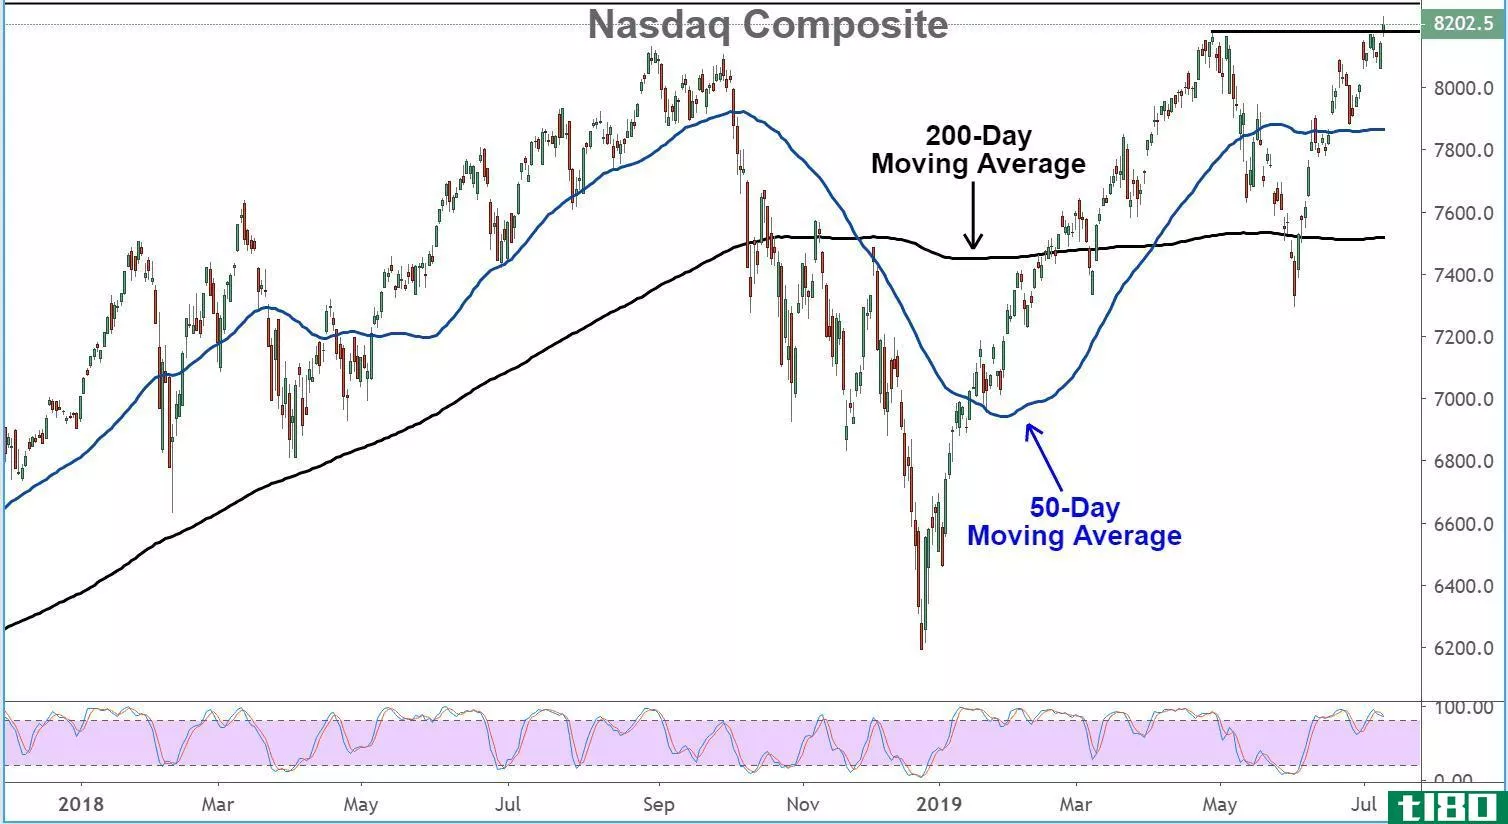 Chart showing the performance of the Nasdaq Composite Index